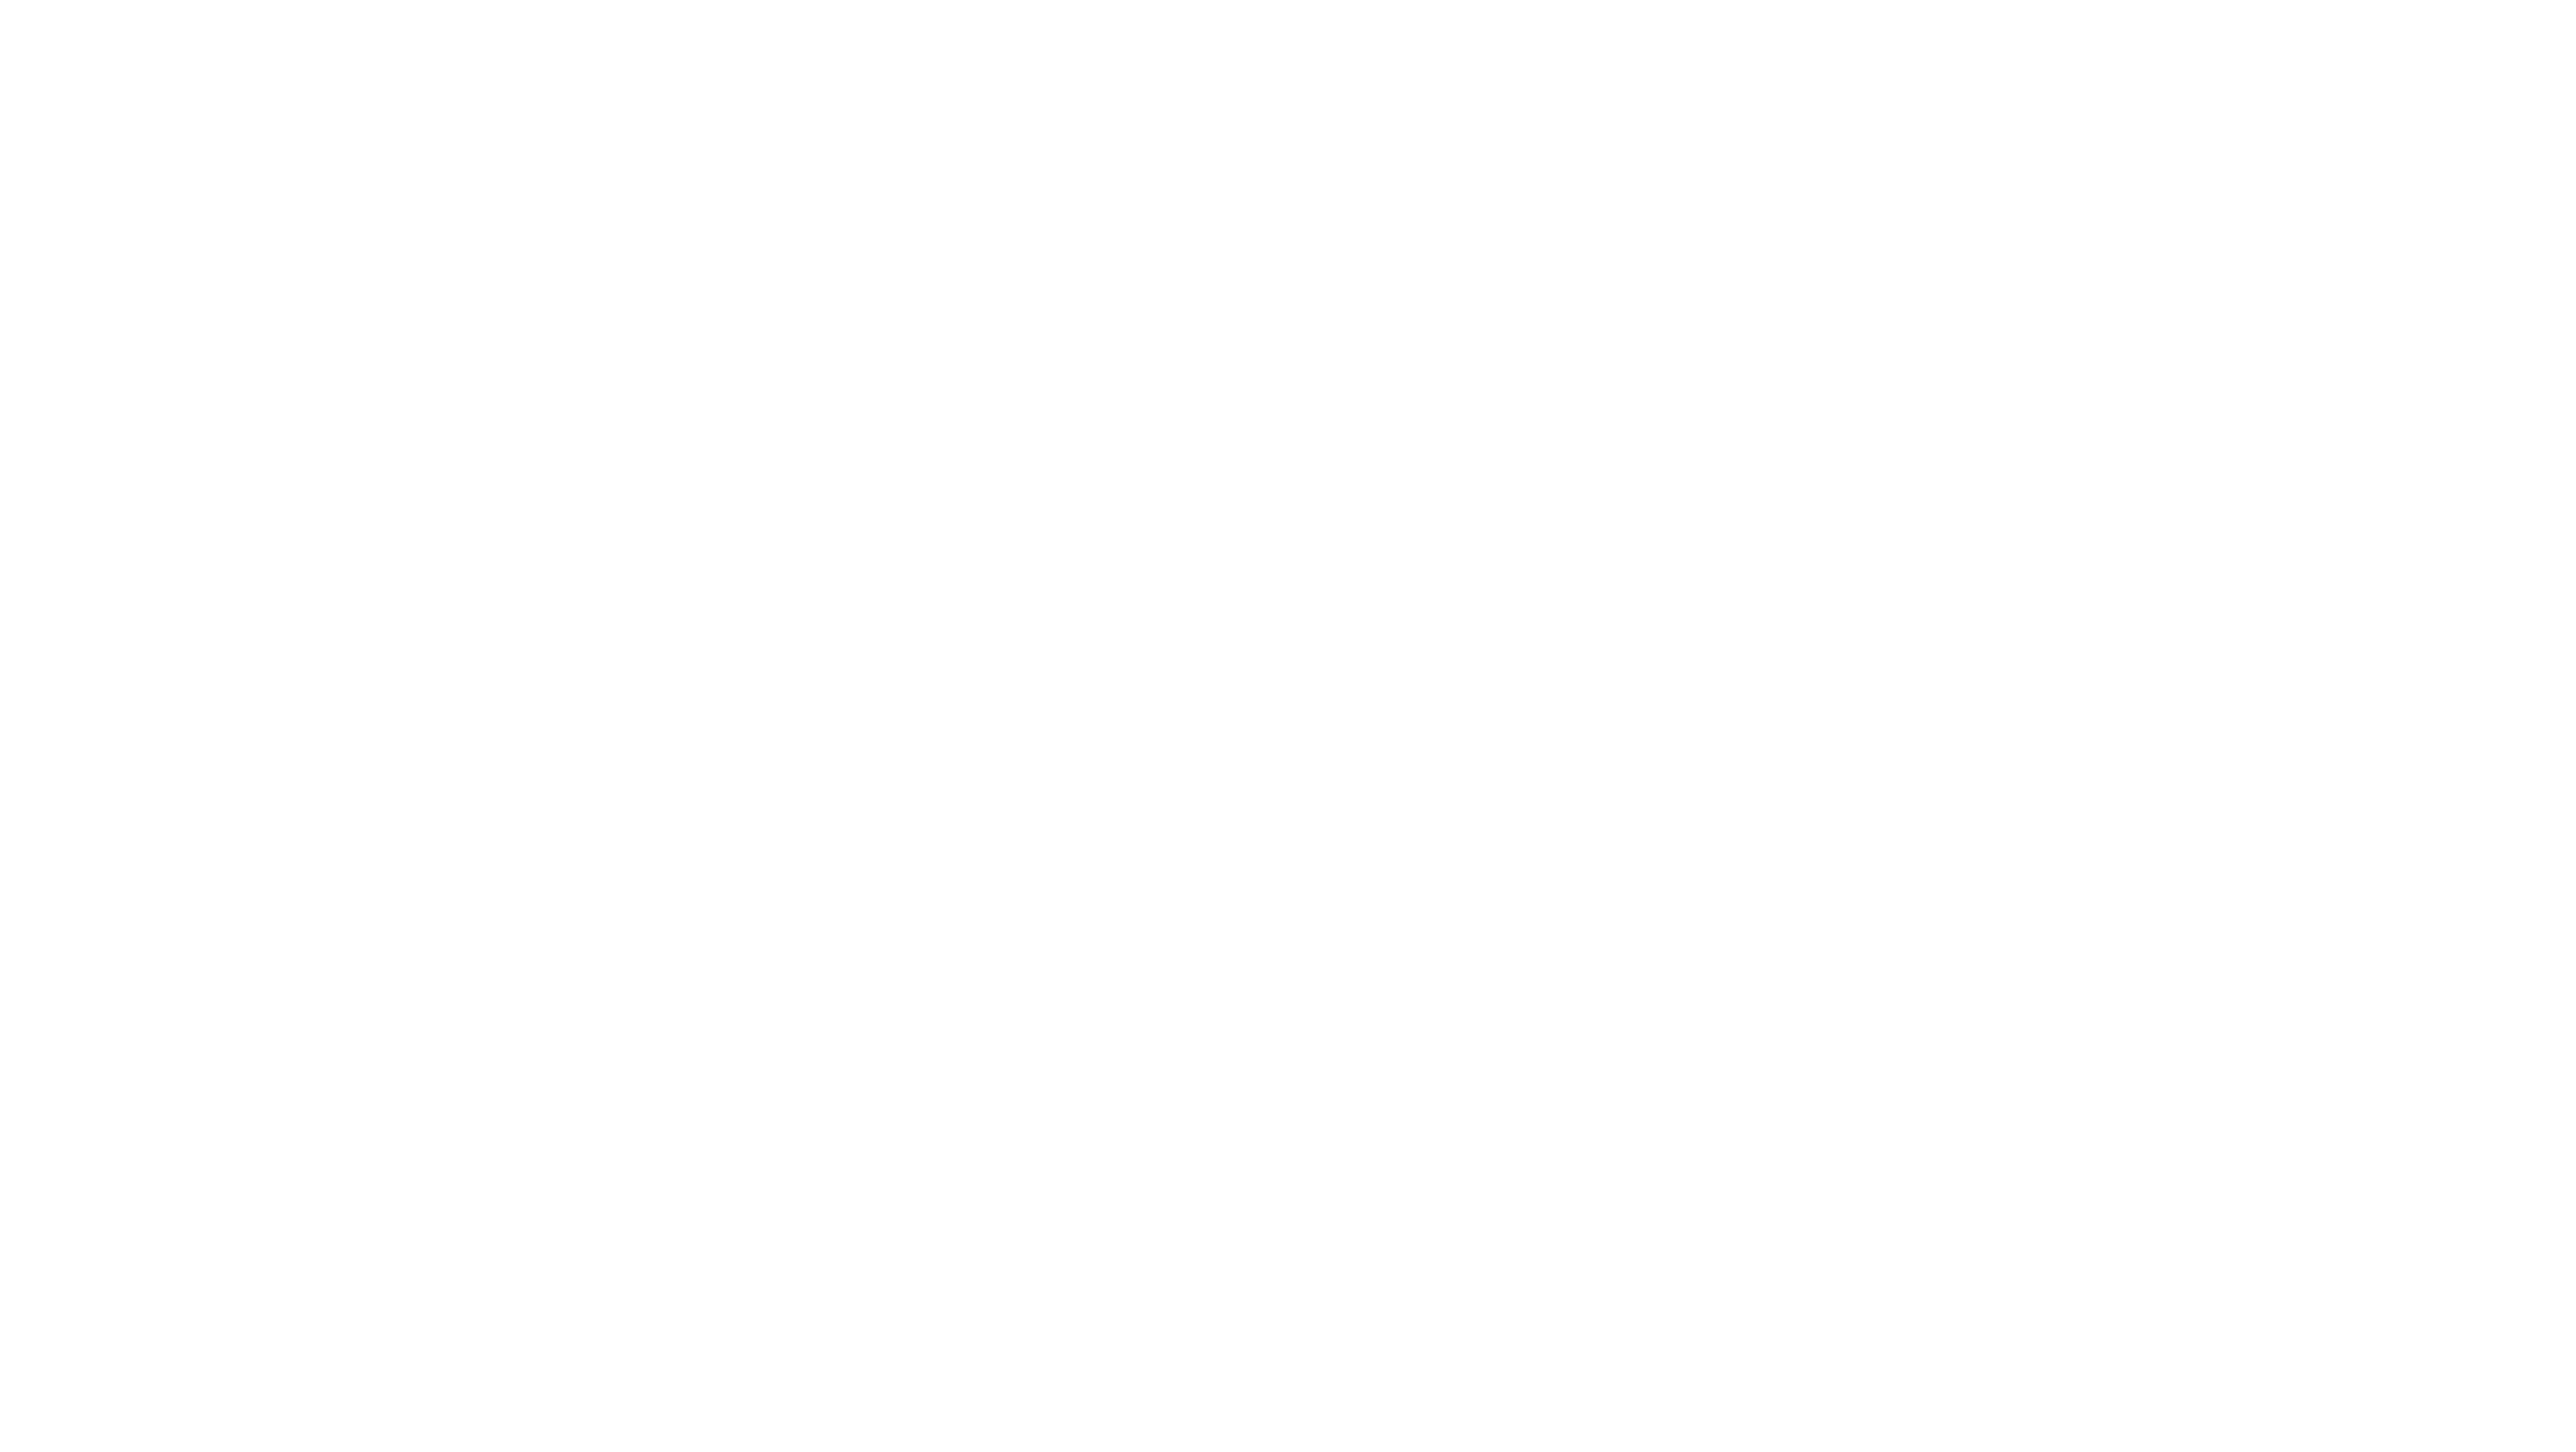 Christmas in Pine Valley logo